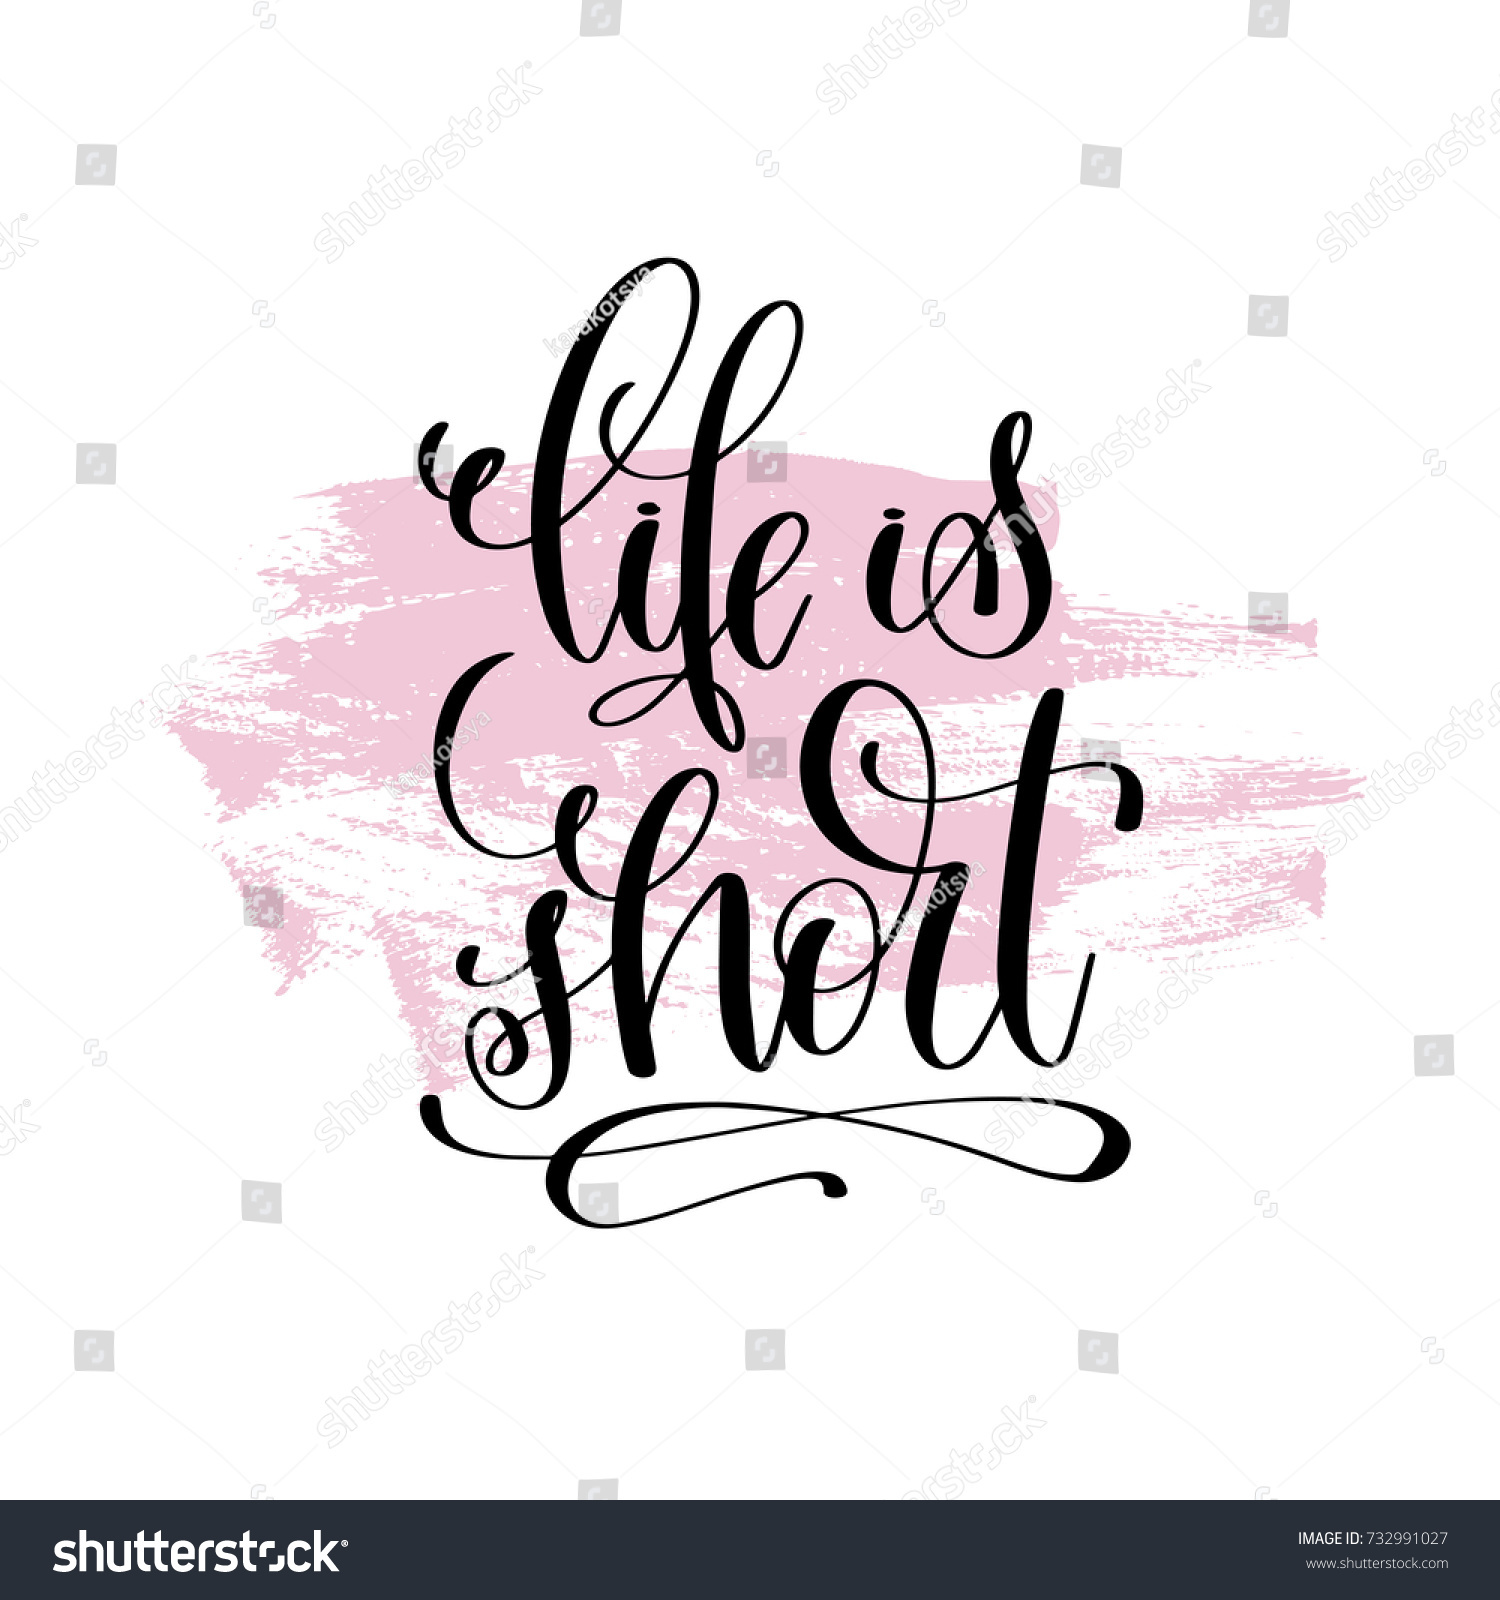 short meaningful quotes about love and life life short hand written lettering positive stock illustration